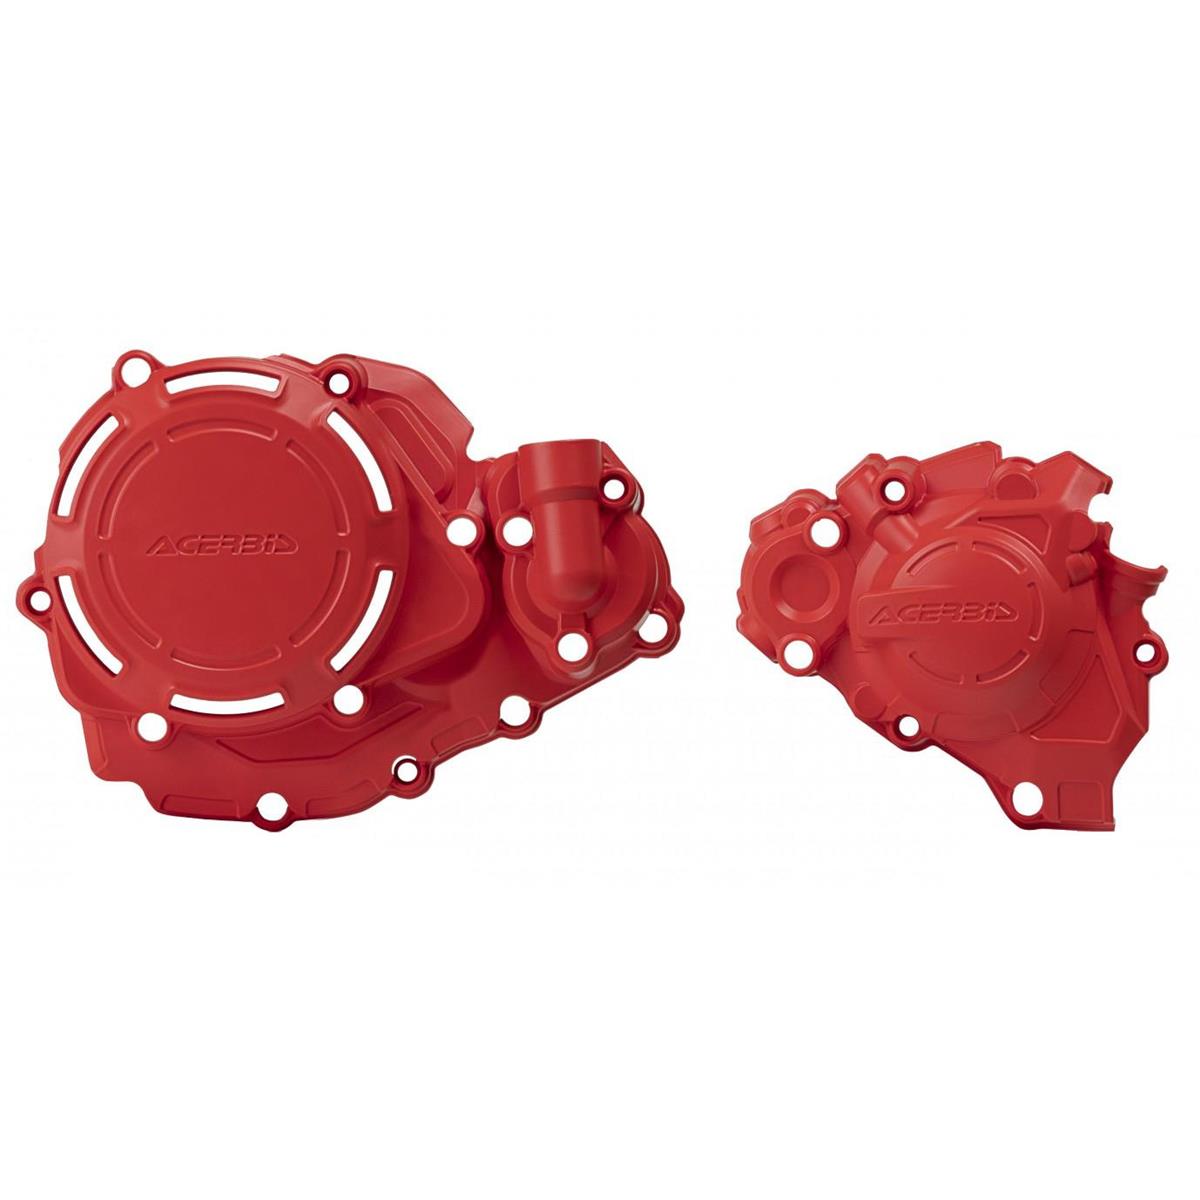 Acerbis Clutch/Ignition Cover Protection X-Power Honda CRF 450 17-20, Red